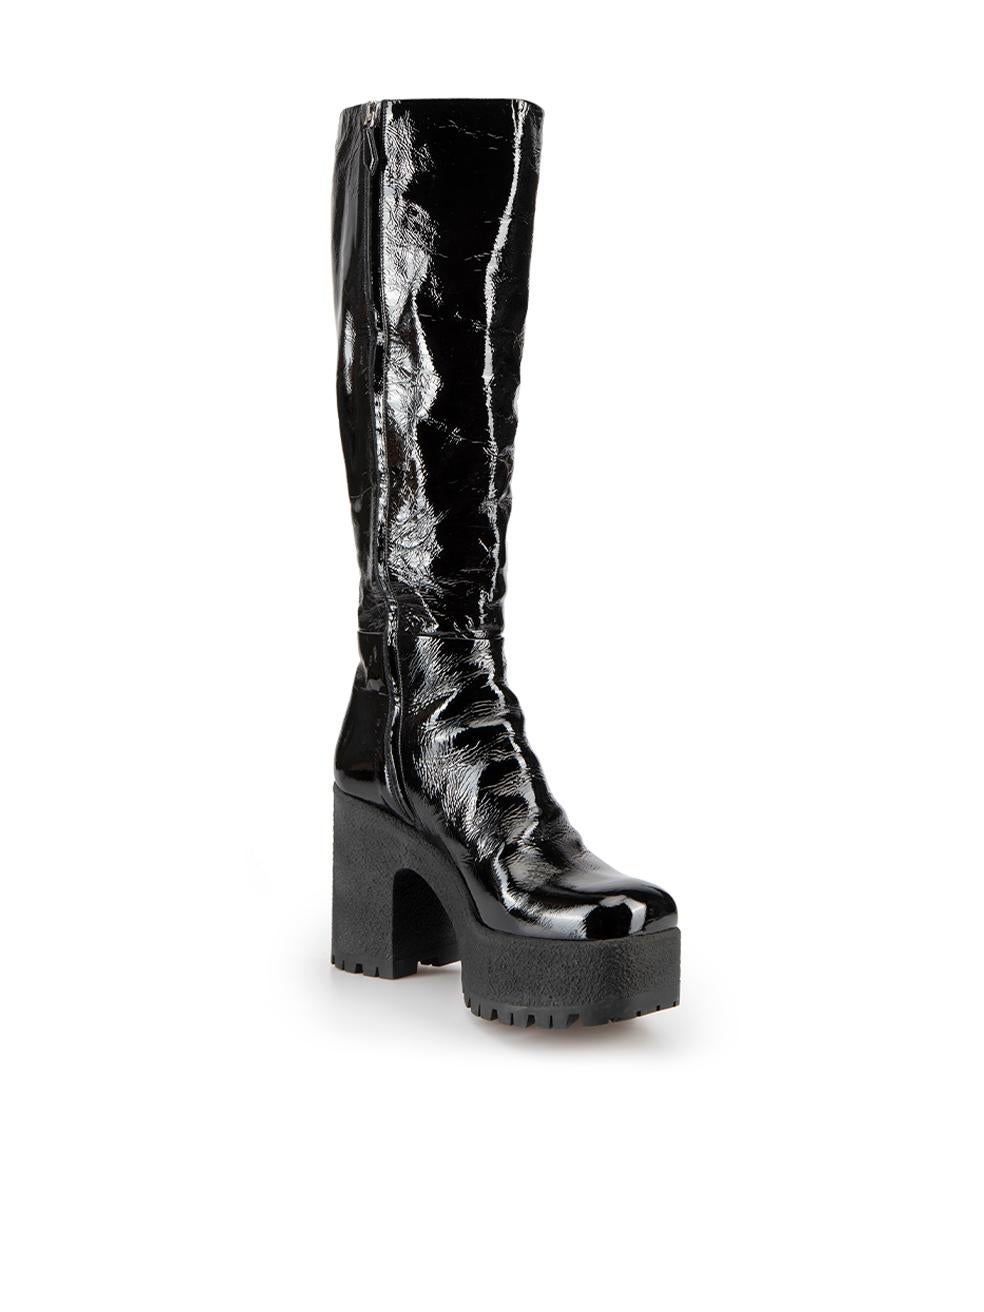 CONDITION is Very good. Minimal wear to boots is evident. Minimal wear to the rubber platform with white marks on this used Miu Miu designer resale item. 



Details


Black

Patent leather

Knee high boots

Square toe

Platform high heel

Side zip